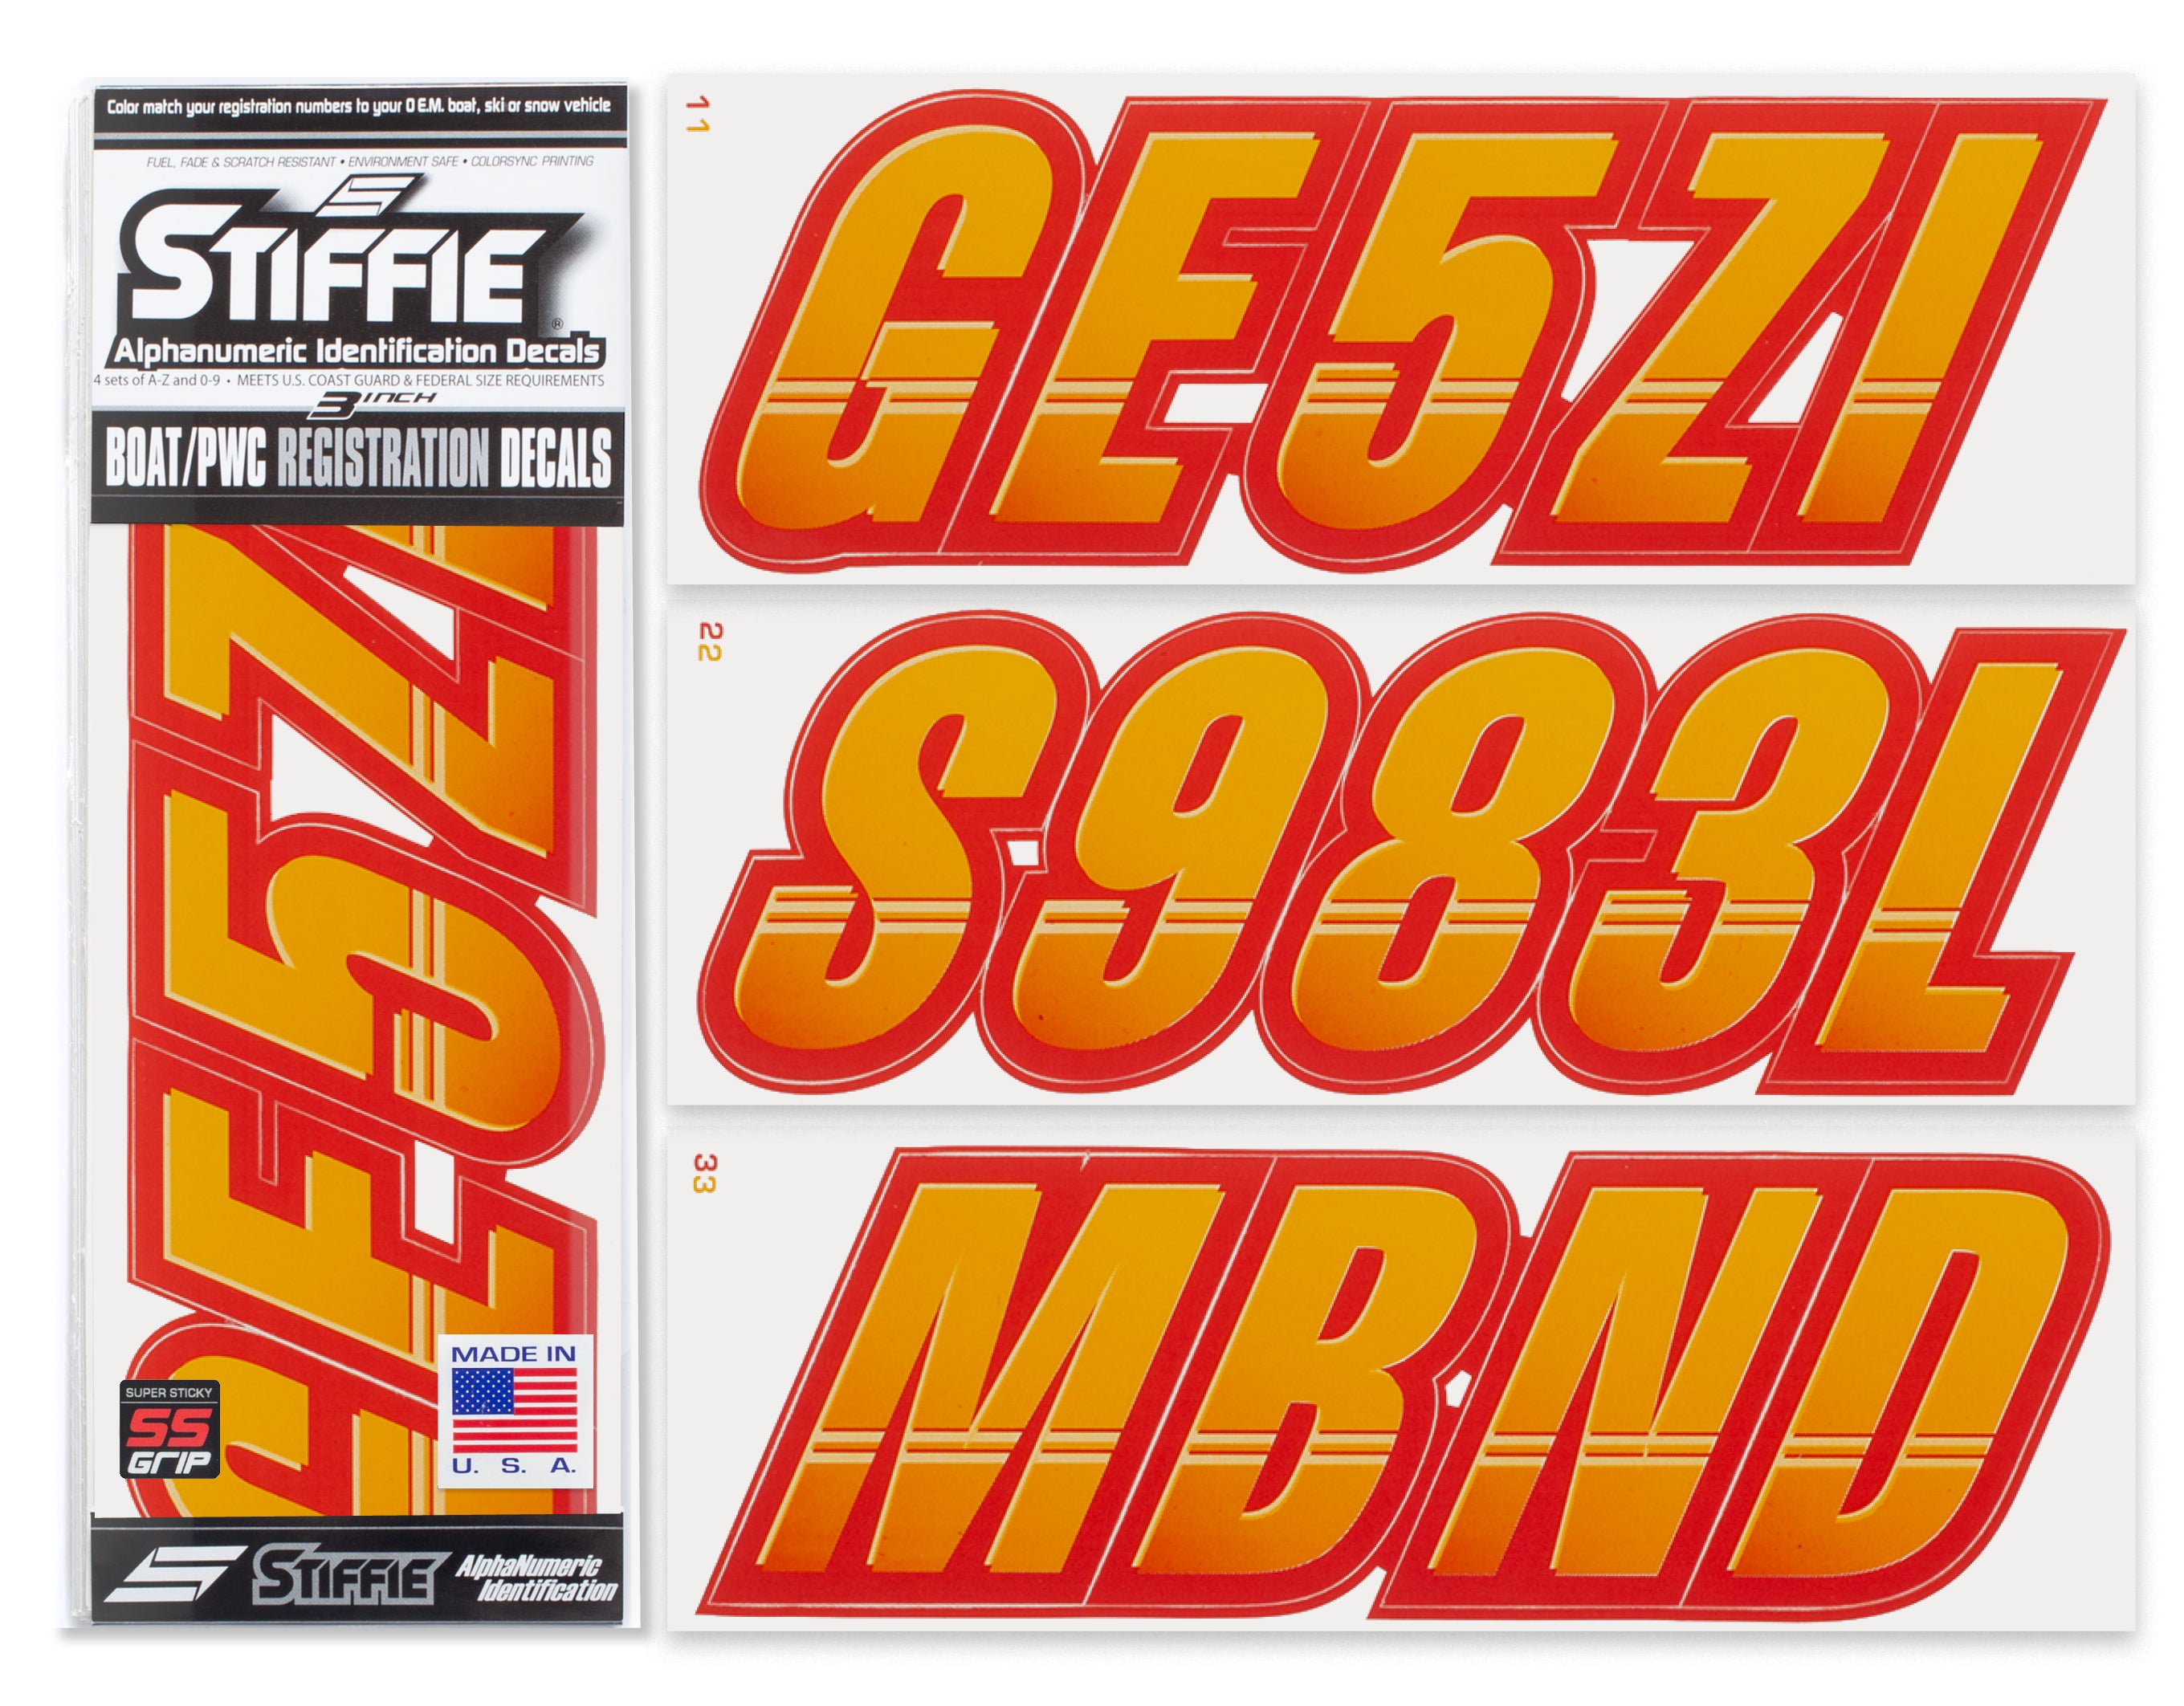 Stiffie Techtron Orange Crush/Red Super Sticky 3" Alpha Numeric Registration Identification Numbers Stickers Decals for Sea-Doo Spark, Inflatable Boats, Ribs, Hypalon/PVC, PWC and Boats.